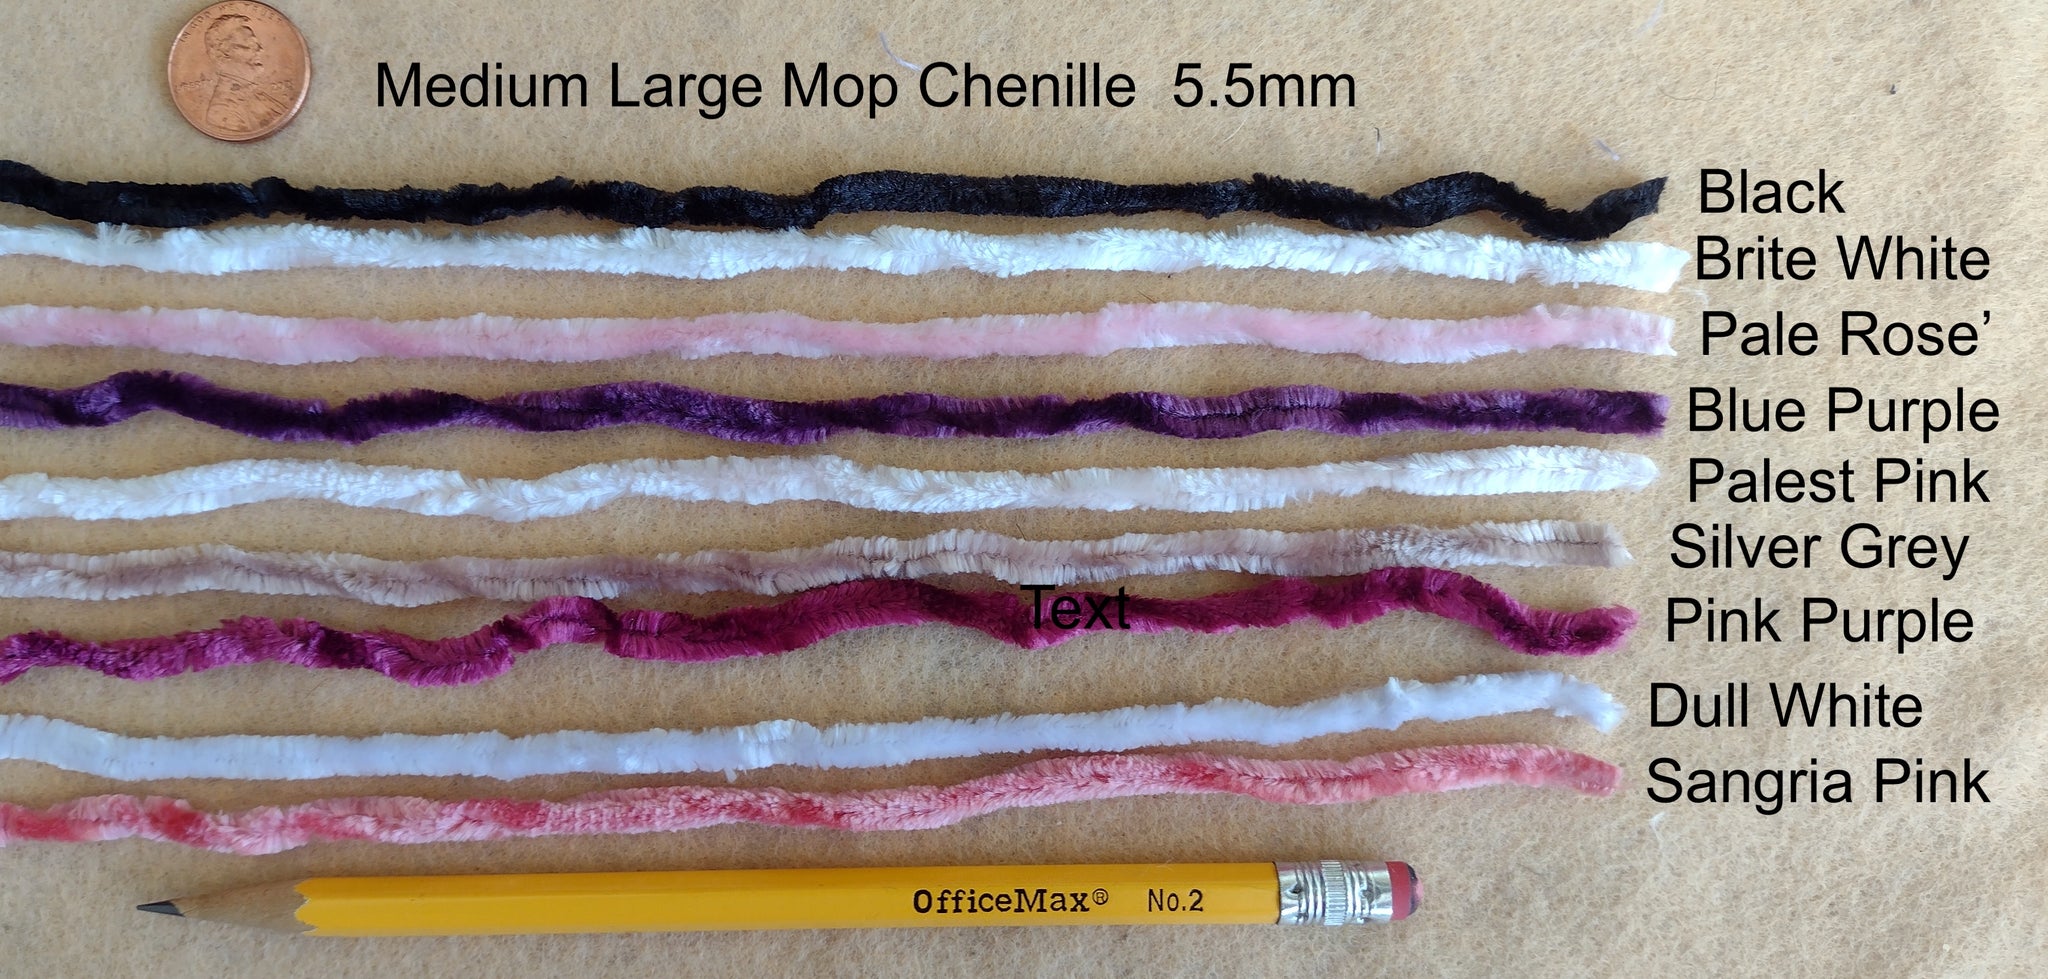 17 Colors Med Large Mop Chenille 5.5mm